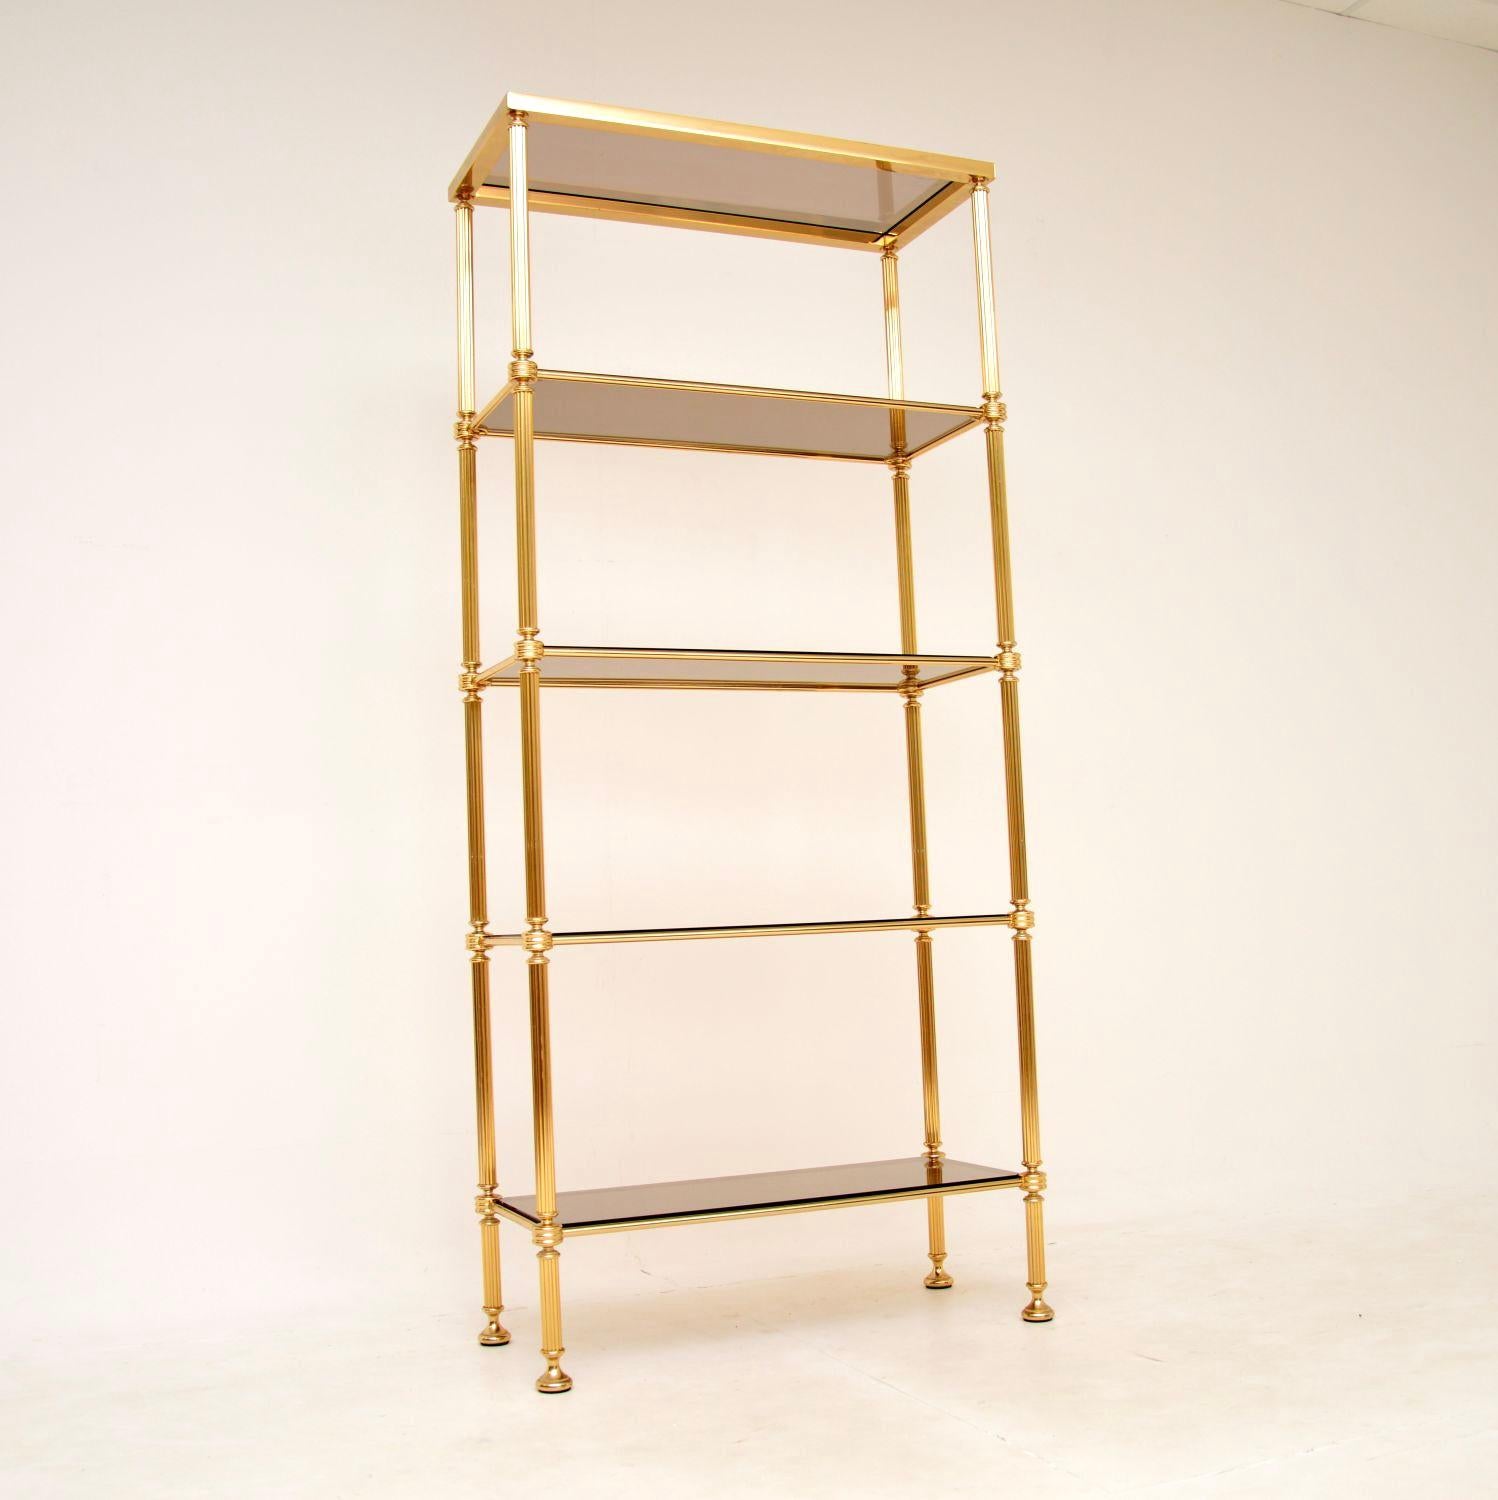 An extremely stylish and very well made vintage French etagere stand in solid brass and glass. This was made in France during the 1970’s.

The quality is outstanding, this is sturdy yet elegant, and is a fantastic size. The frame has fluted legs